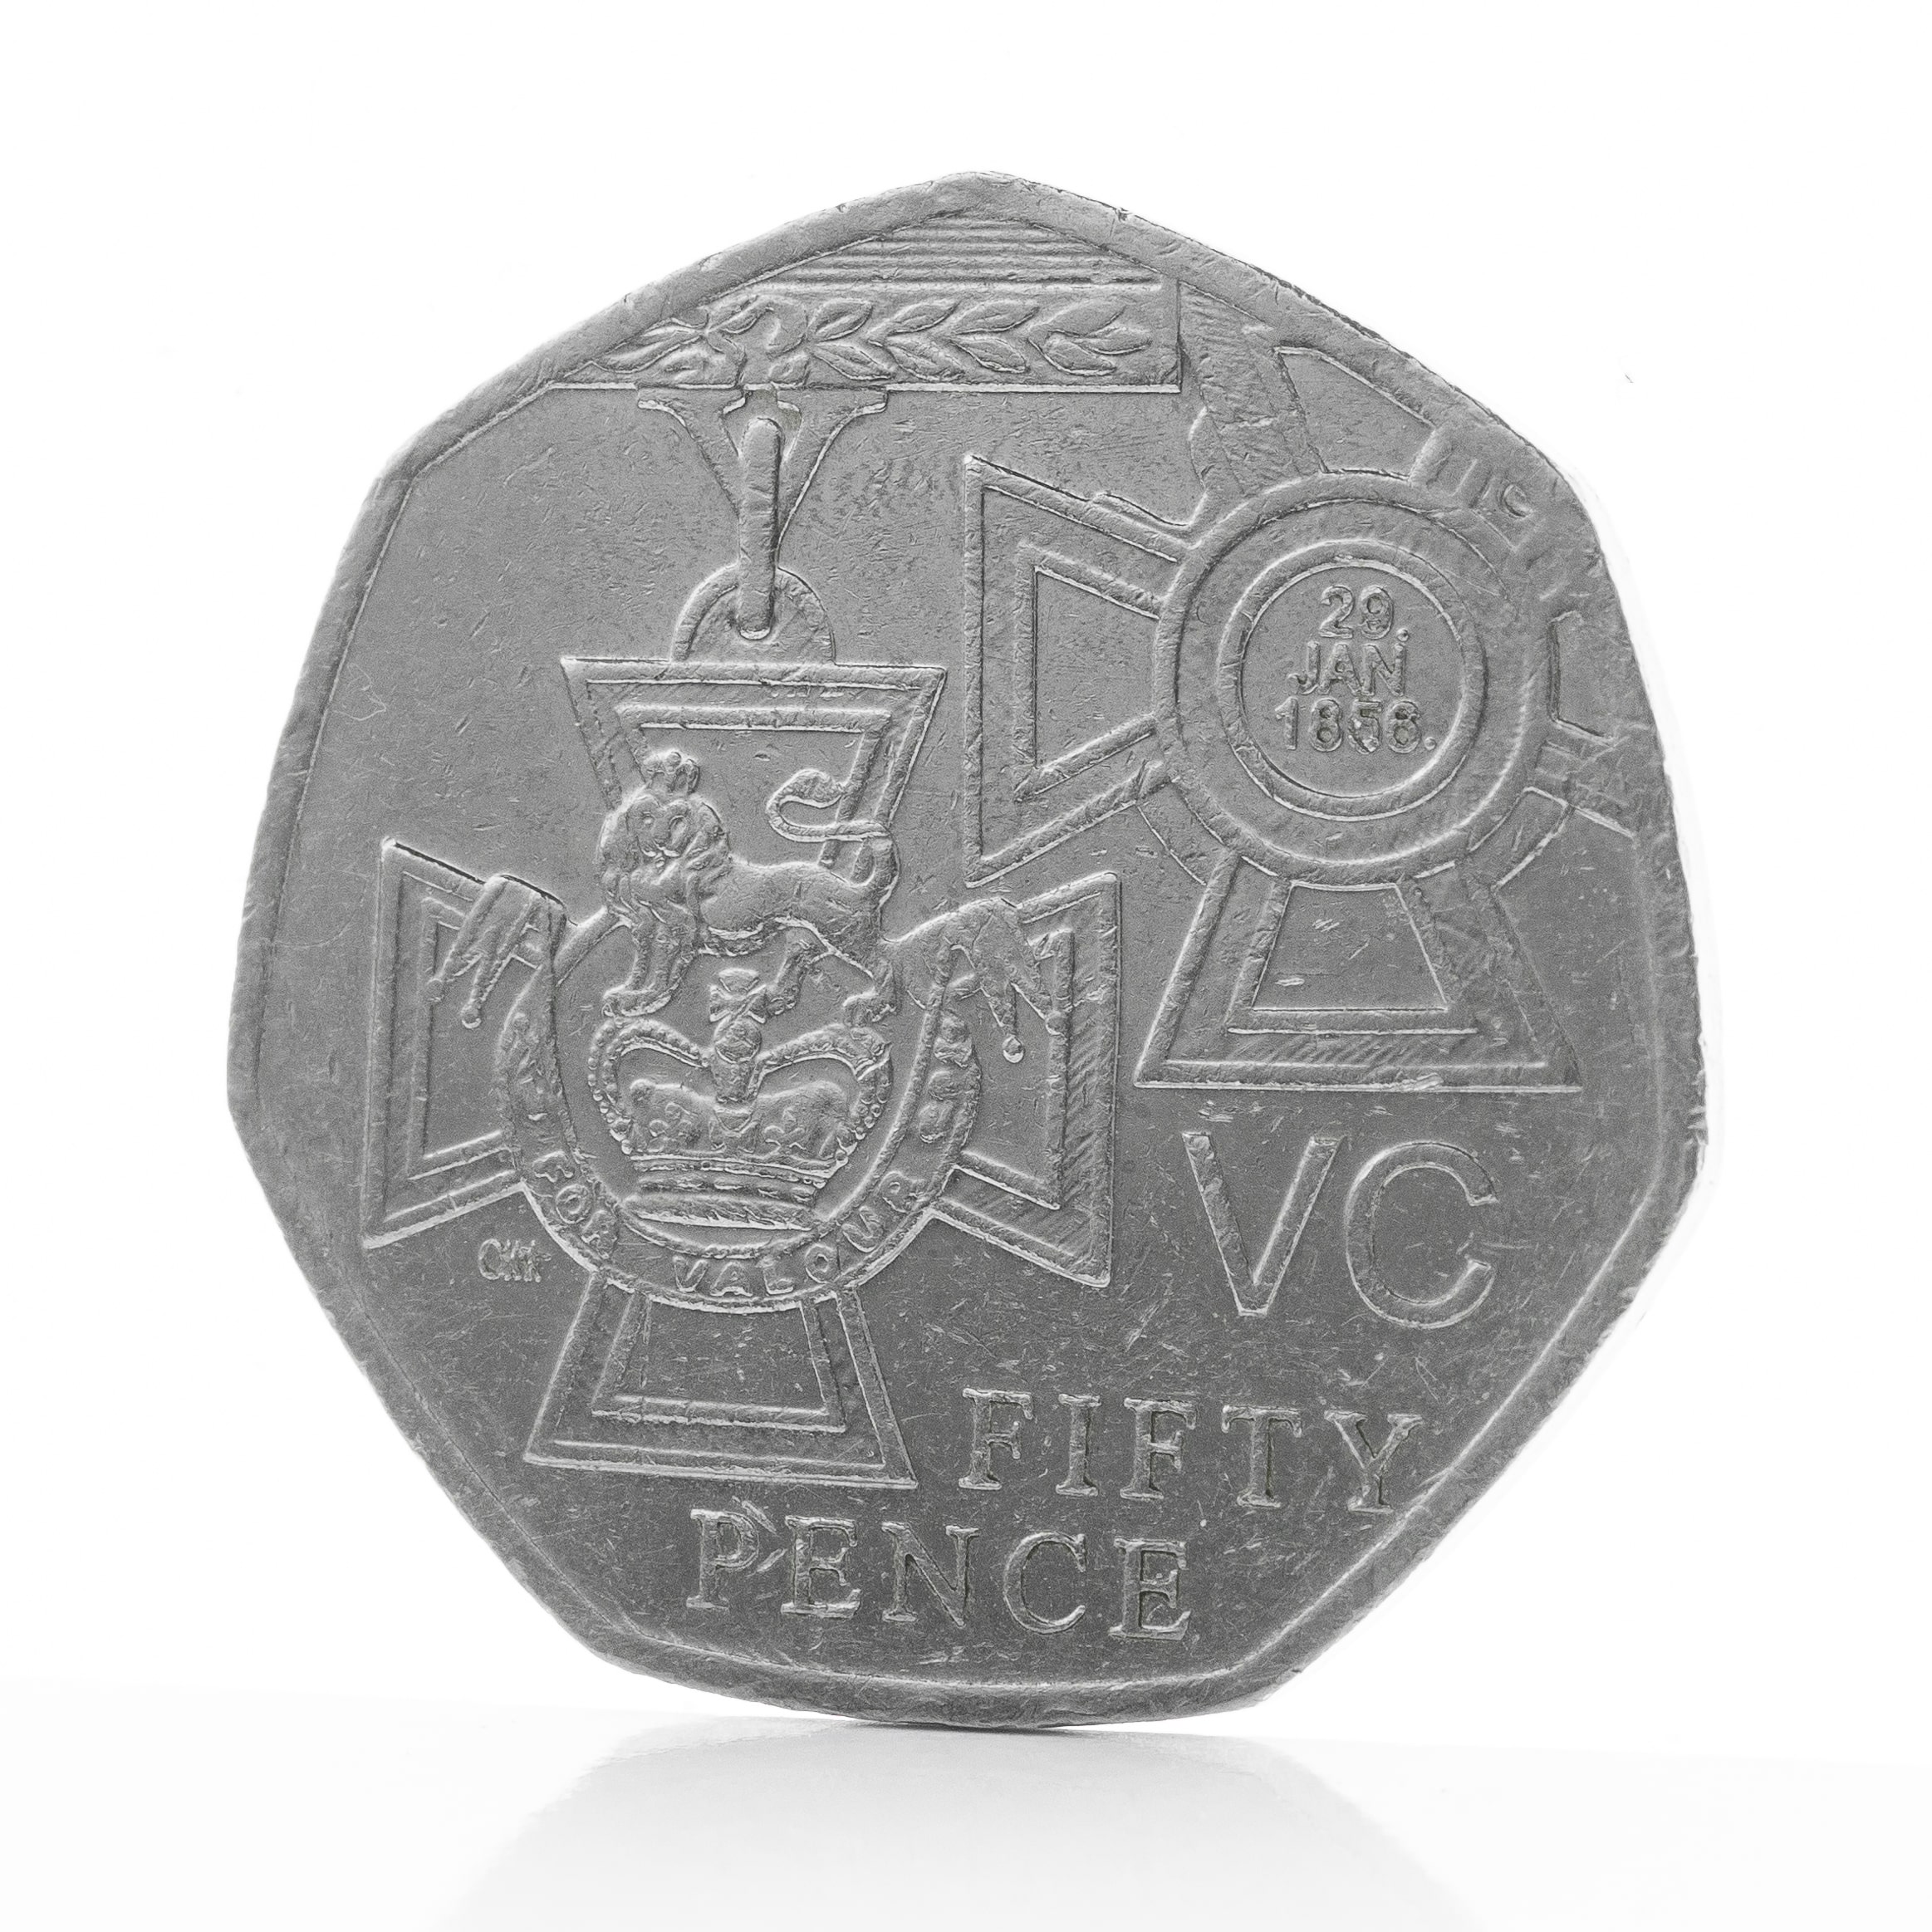 VC Medal 50p coin